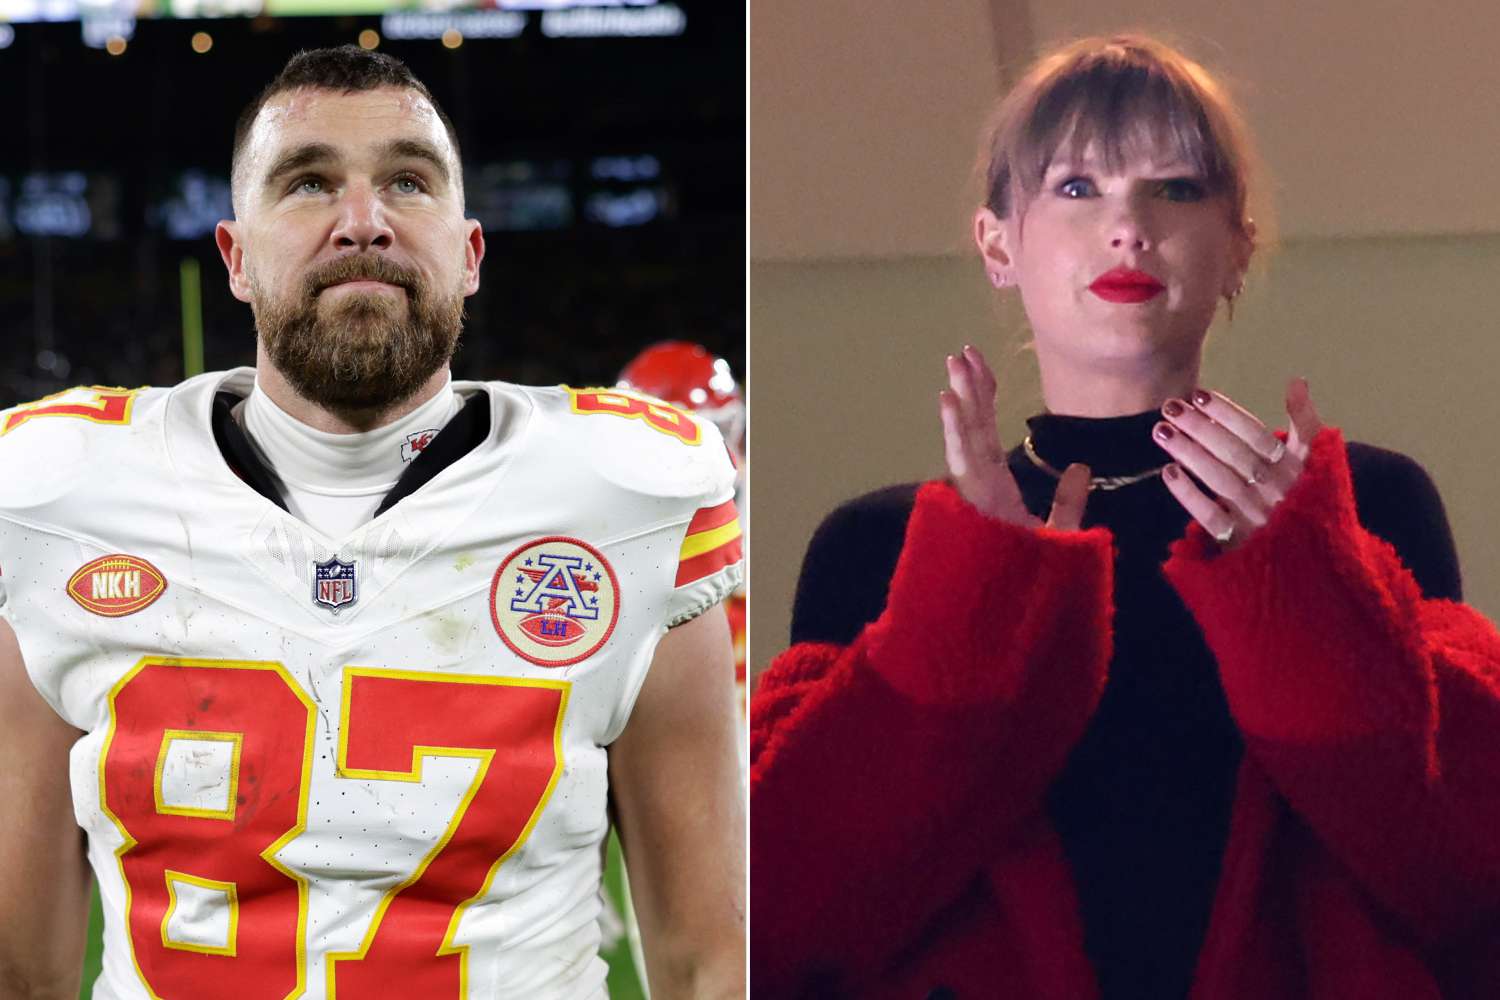 "There's no love, only hate and insults!" Taylor Swift declares after the Chiefs' loss to the Raiders, vowing never to attend another Chiefs game due to being unjustly labeled as "bad luck." "There's no love, only hate and insults!" Taylor Swift declares after the Chiefs' loss to the Raiders, vowing never to attend another Chiefs game due to being unjustly labeled as "bad luck."